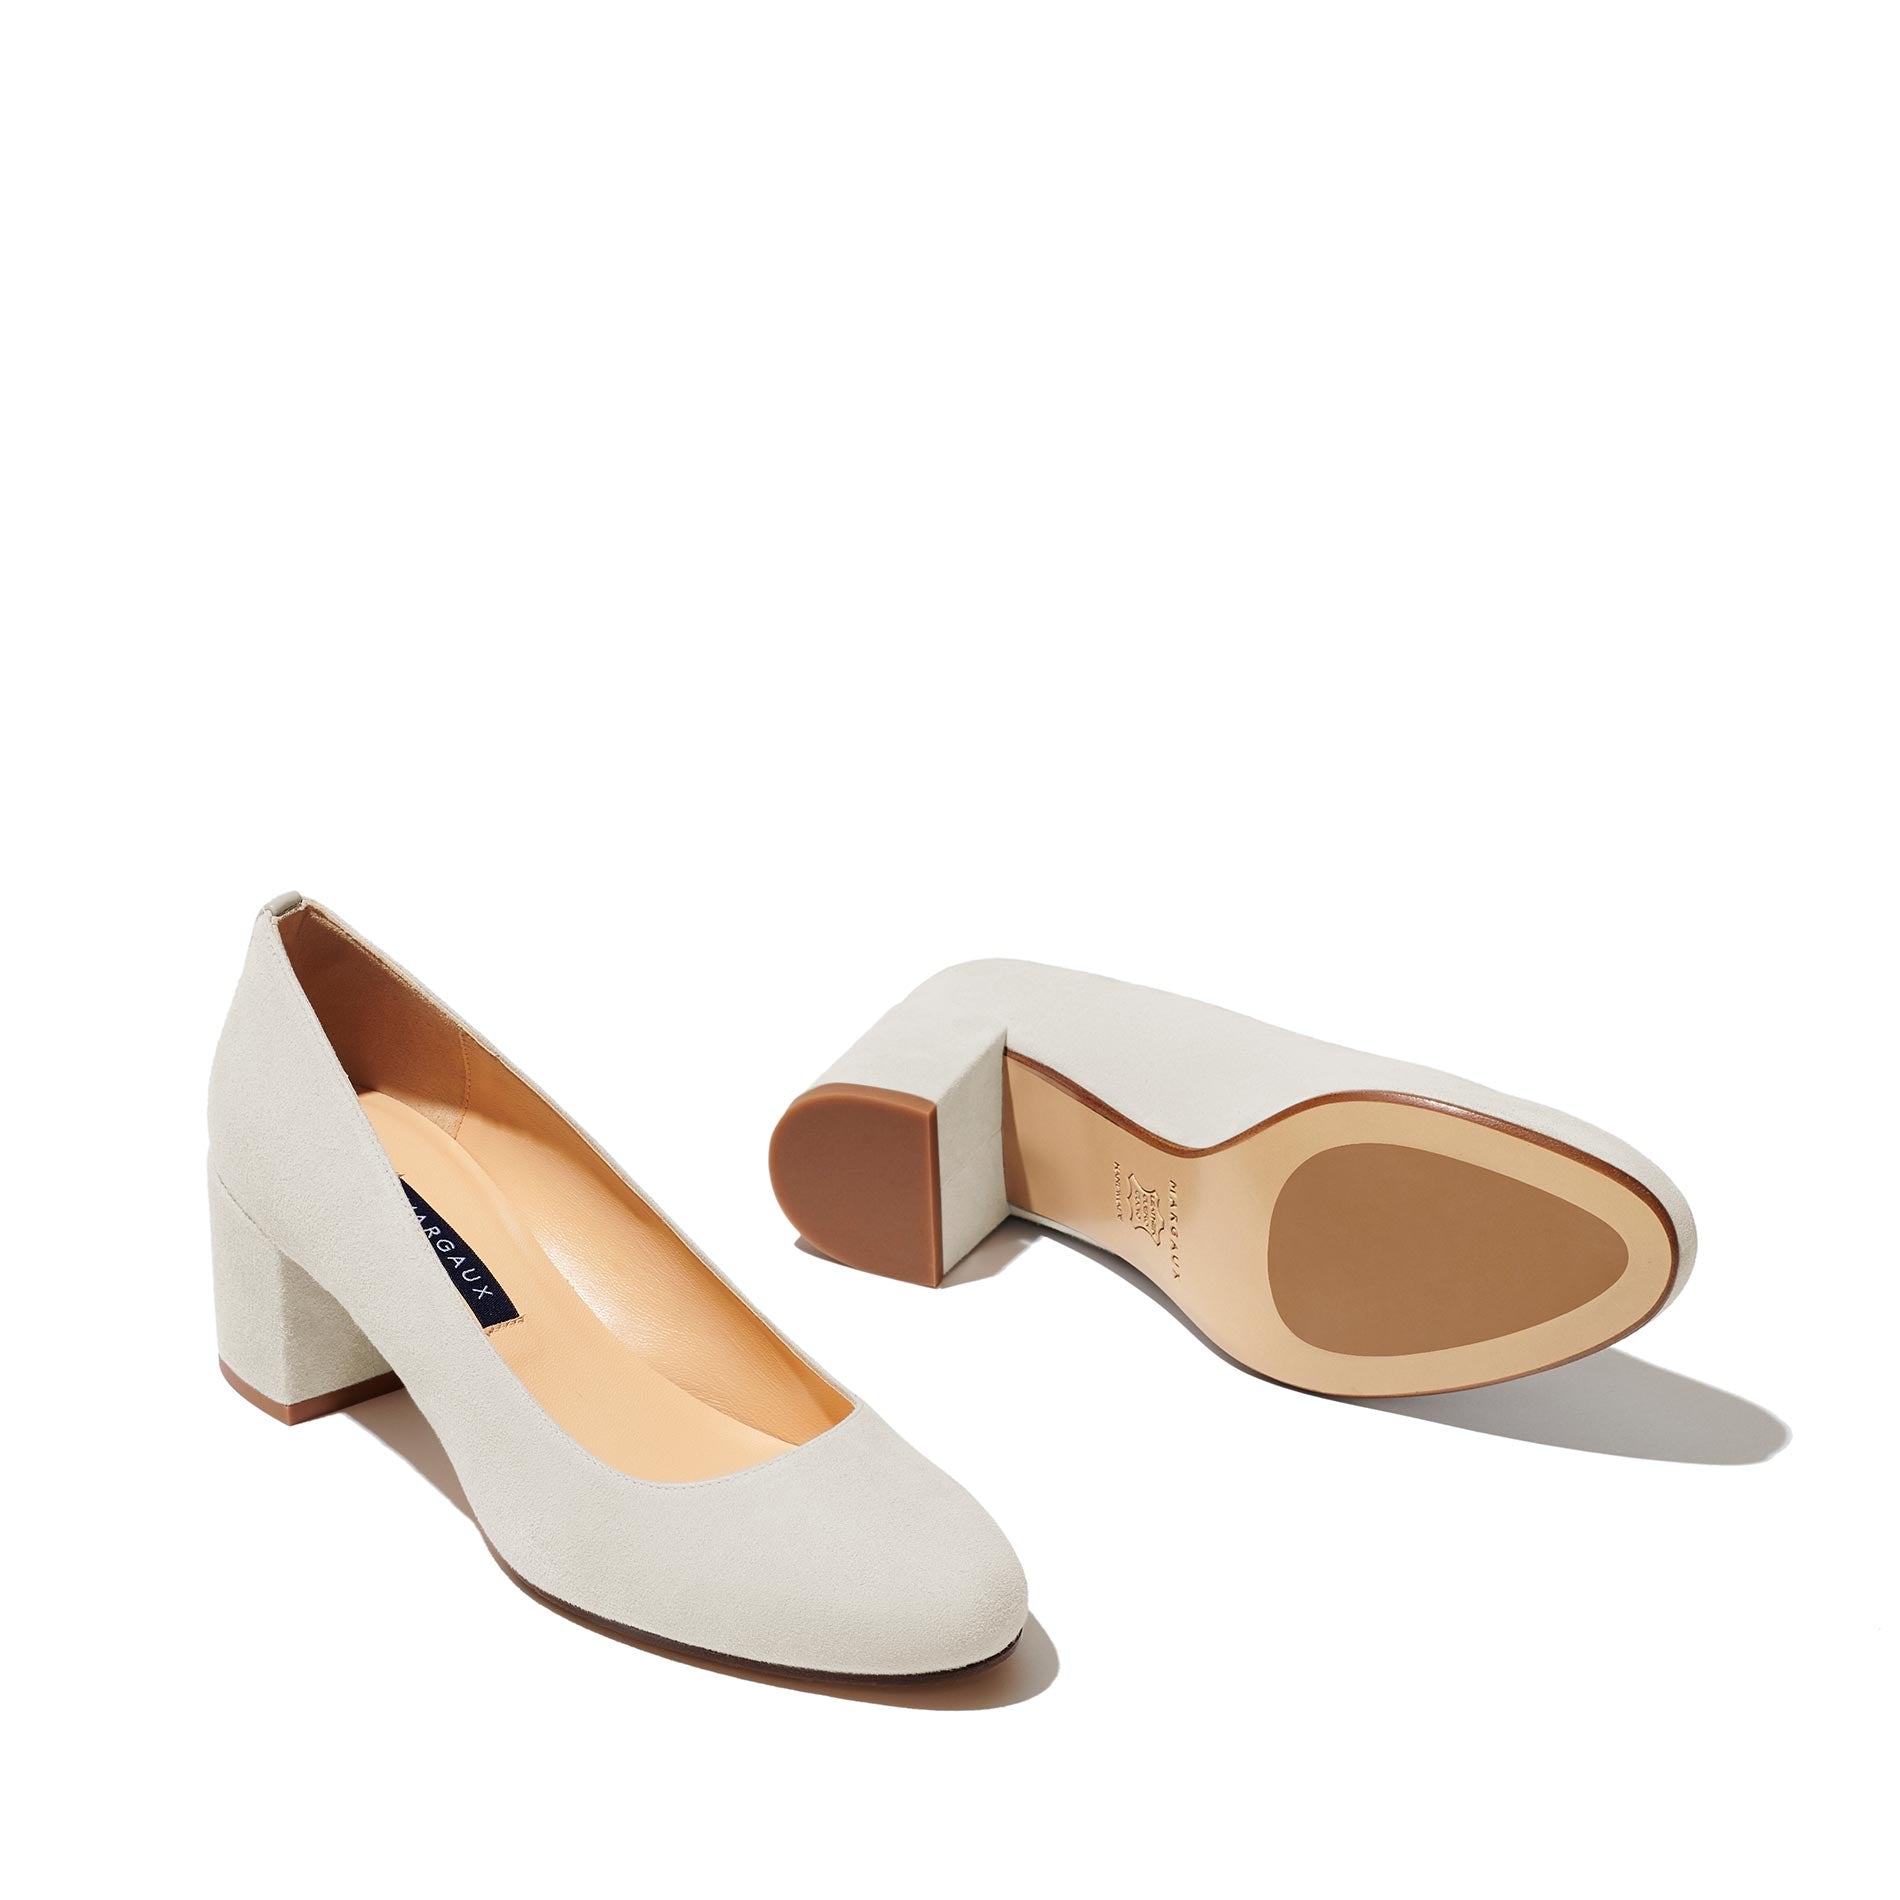 River Island Croc Block Heel Sling Back Court Shoes in White | Lyst